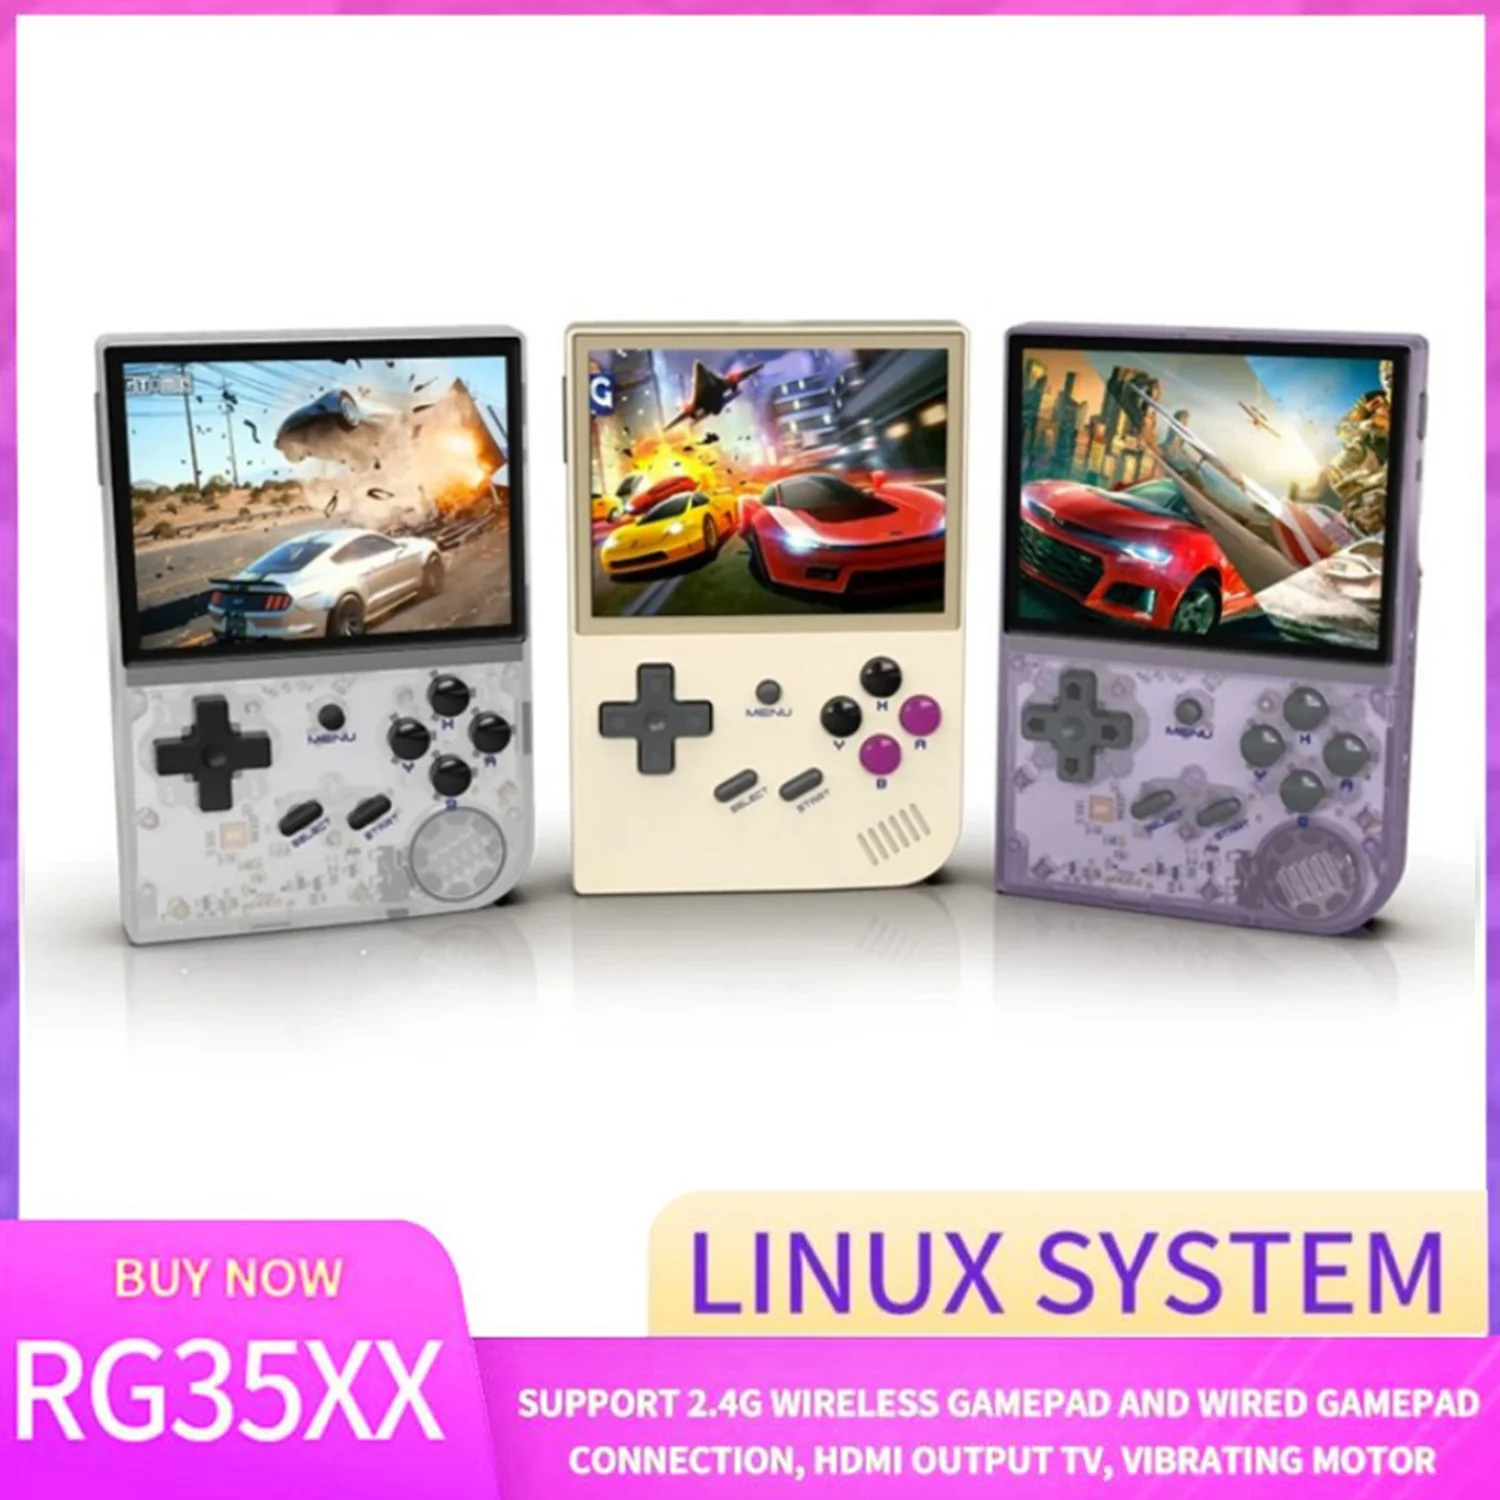 Portable RG35XX Retro Handheld Game Console Linux System 3.5-inch IPS 640*480 Screen Game Player Children's Boys Gifts Christmas